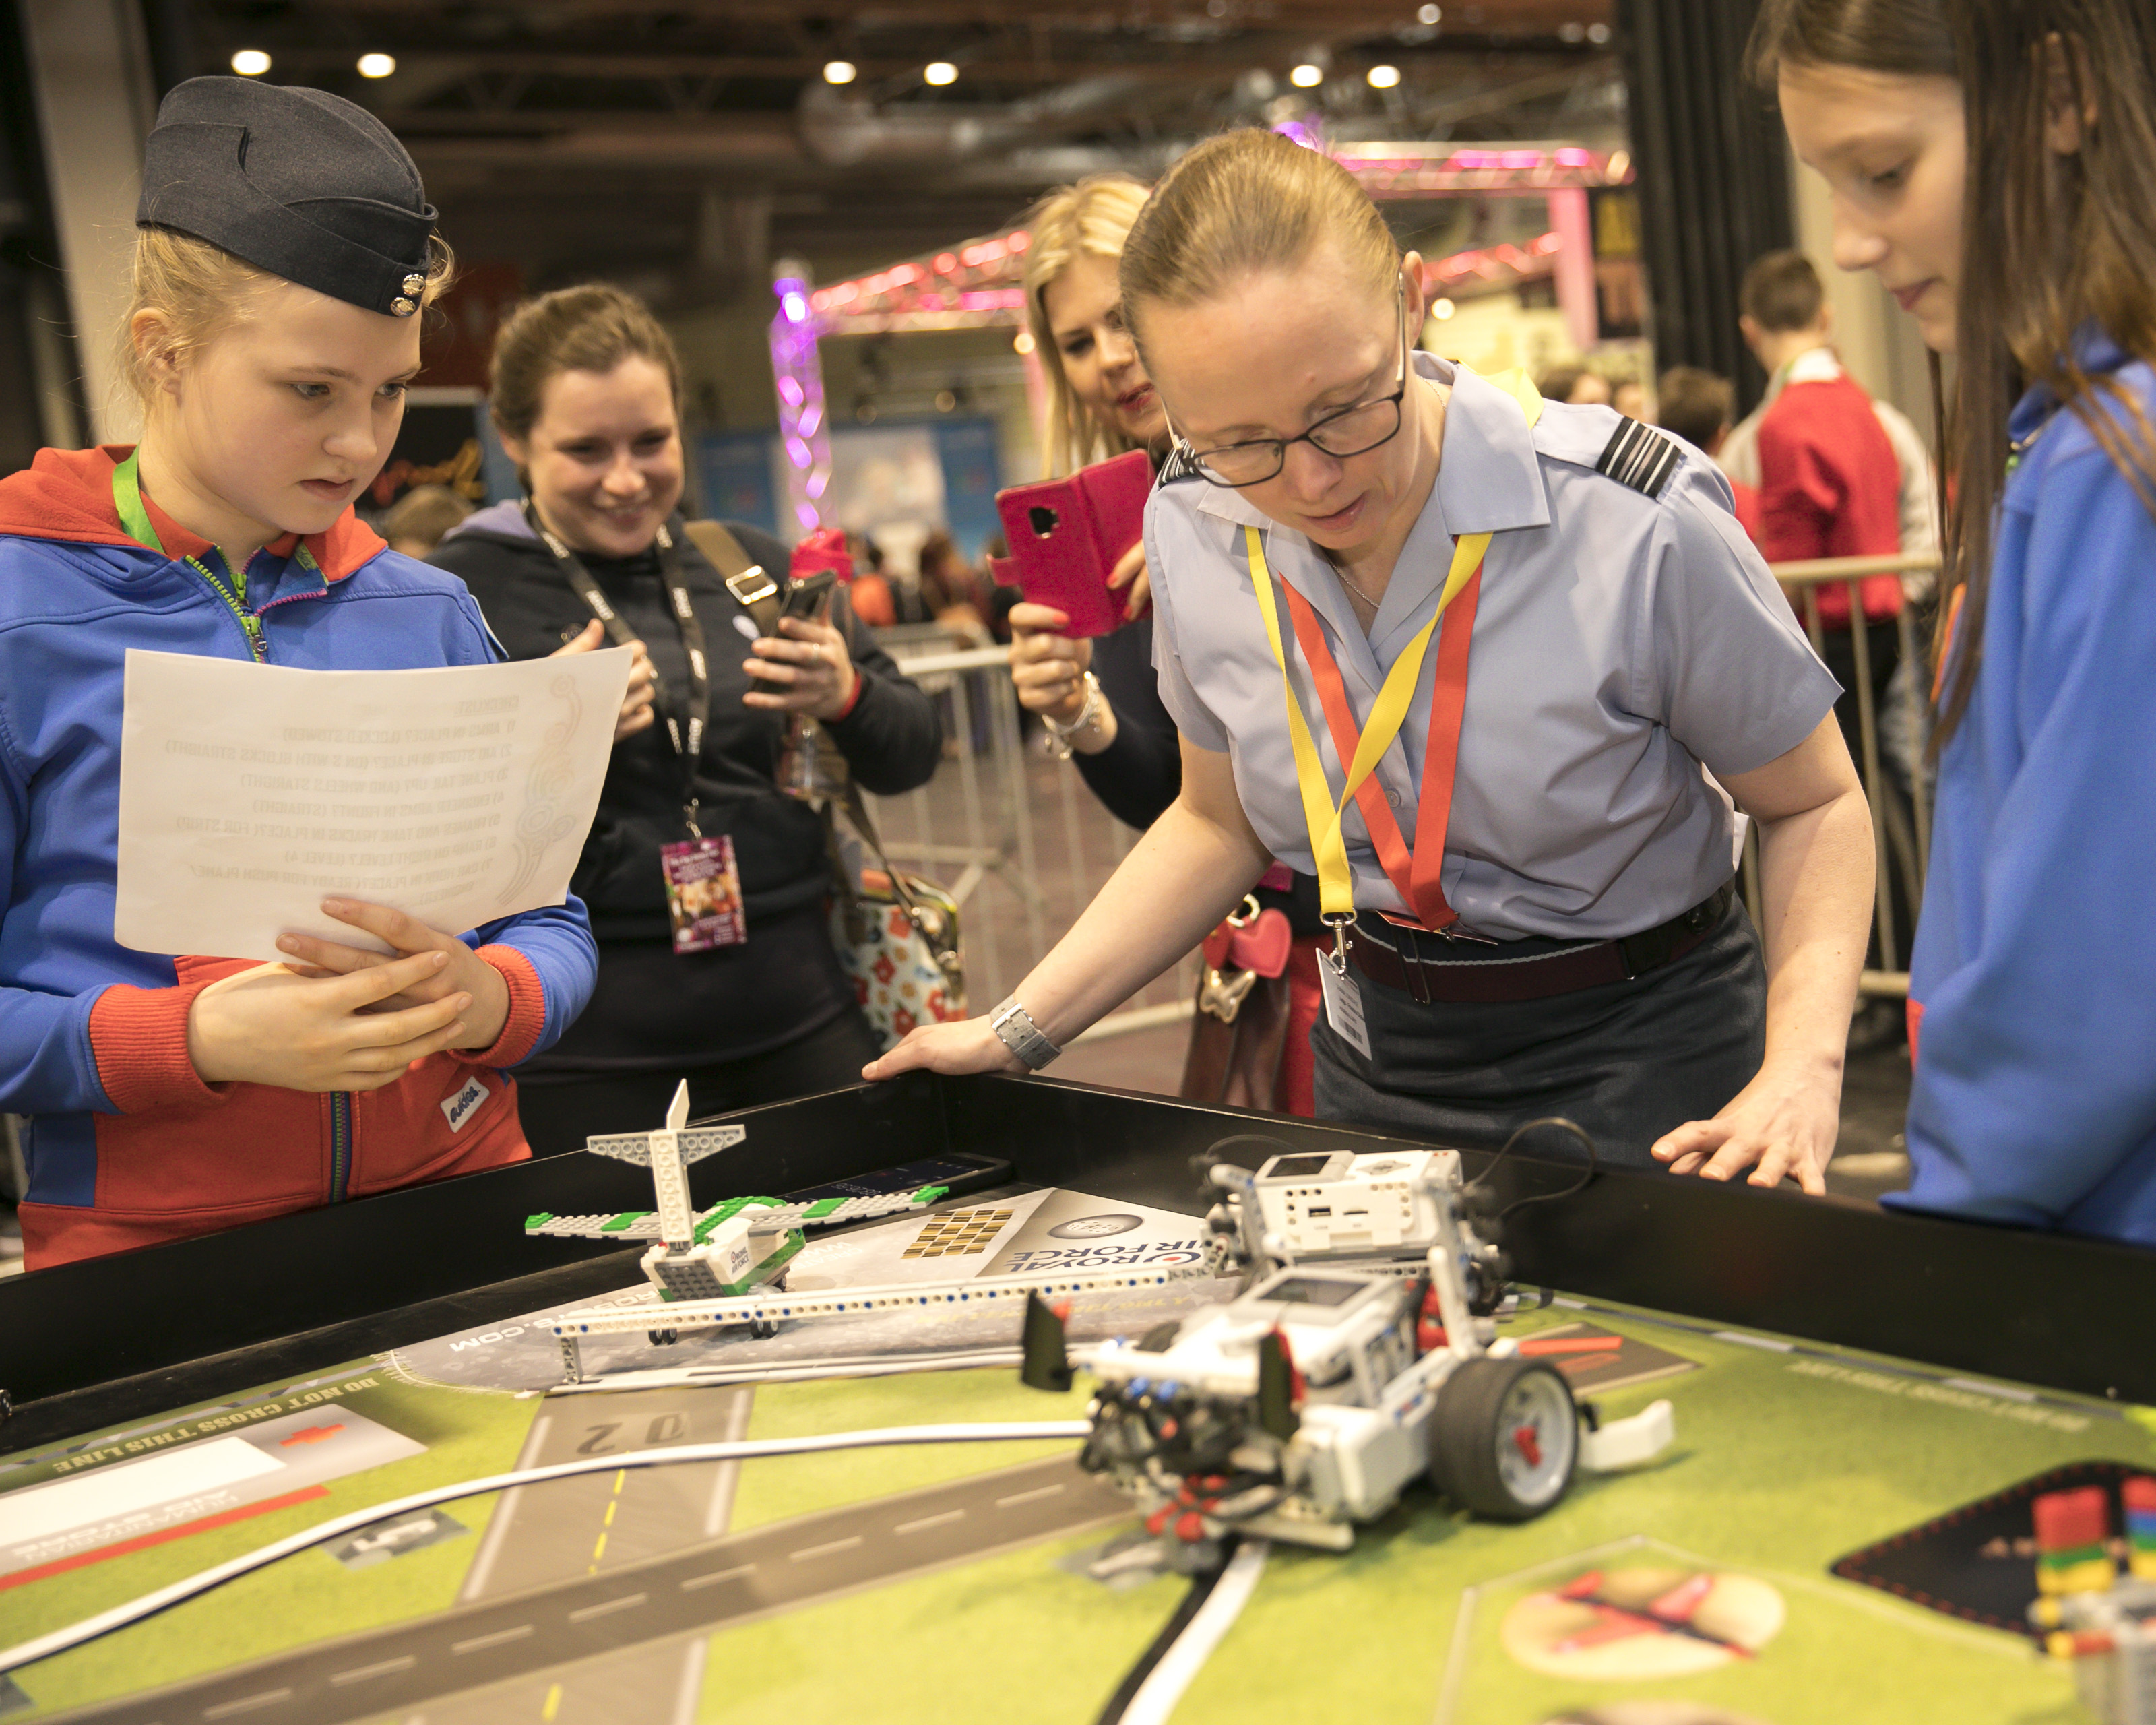 Image shows RAF STEM ambassador and school children looking at table with miniature model airfield on top. 